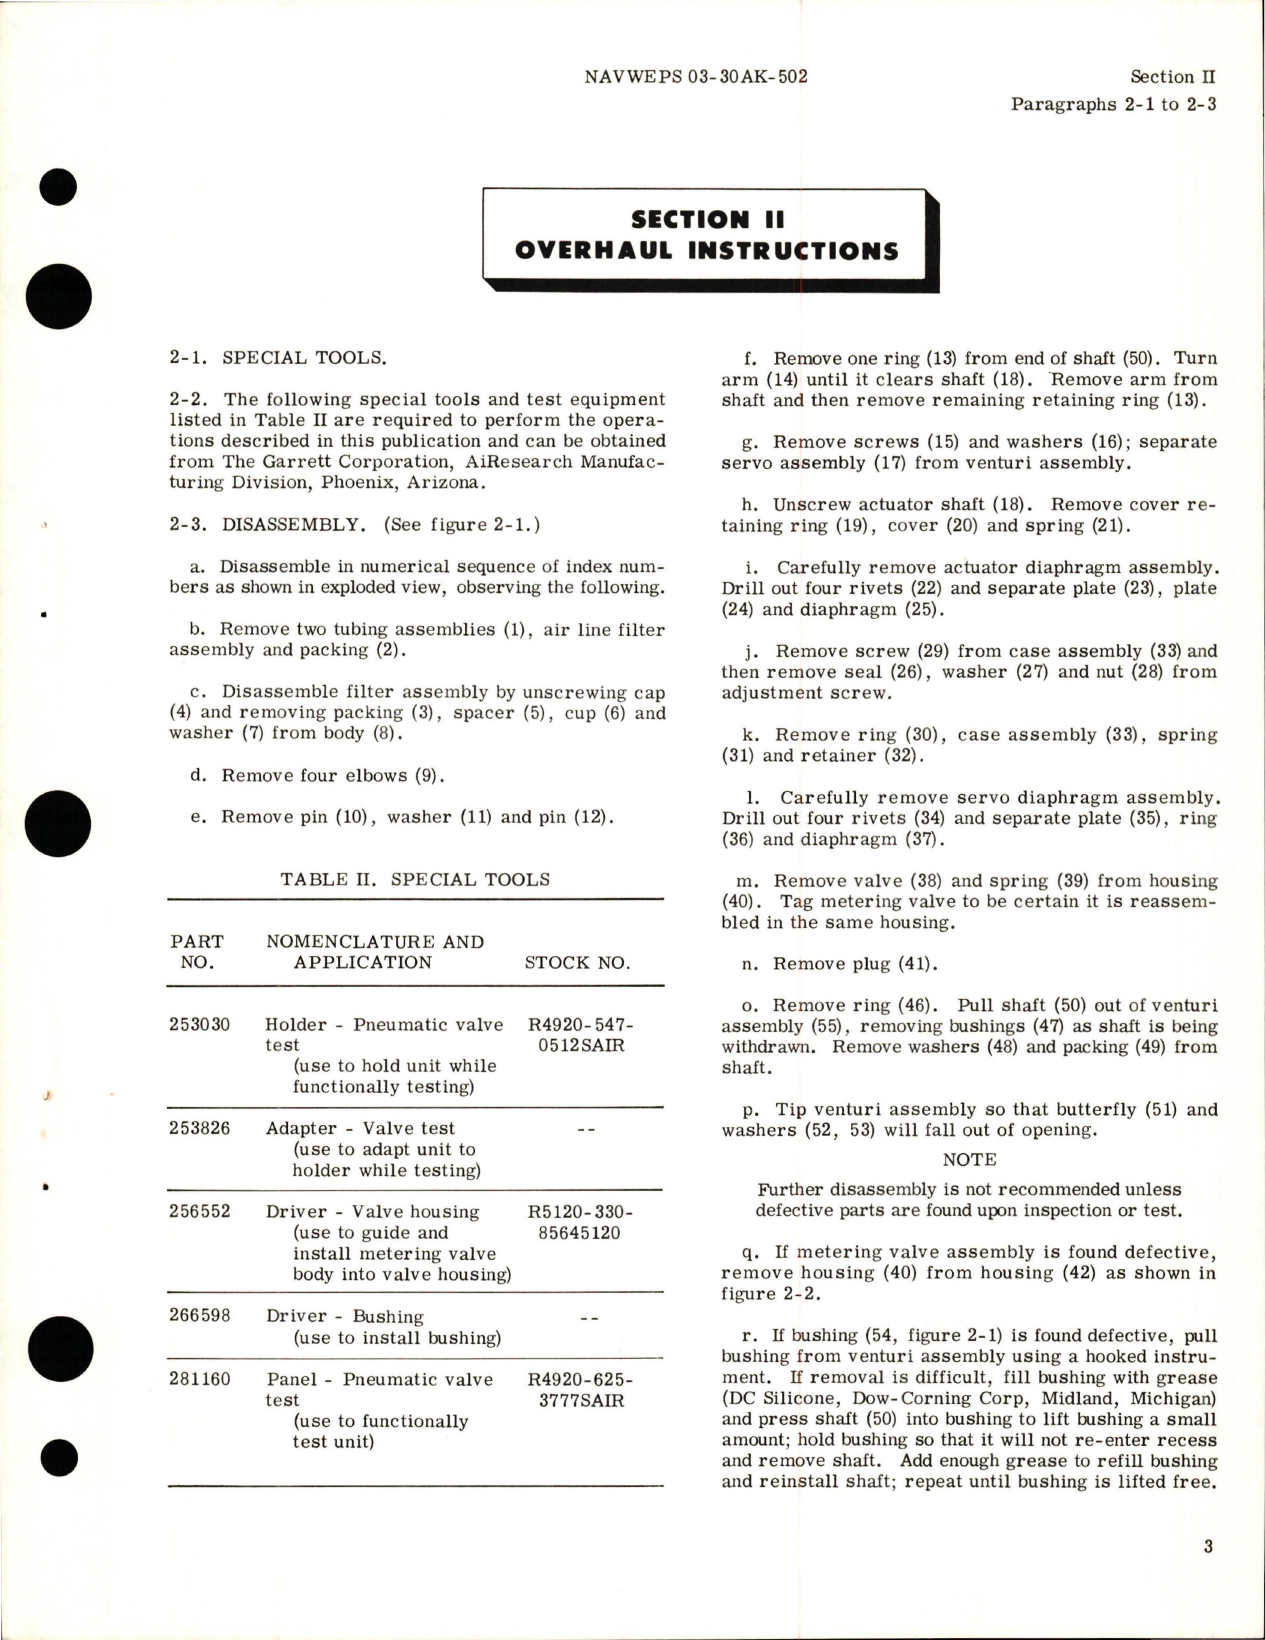 Sample page 7 from AirCorps Library document: Overhaul Instructions for Flow Control Valve - Part 92960-2 SR 1